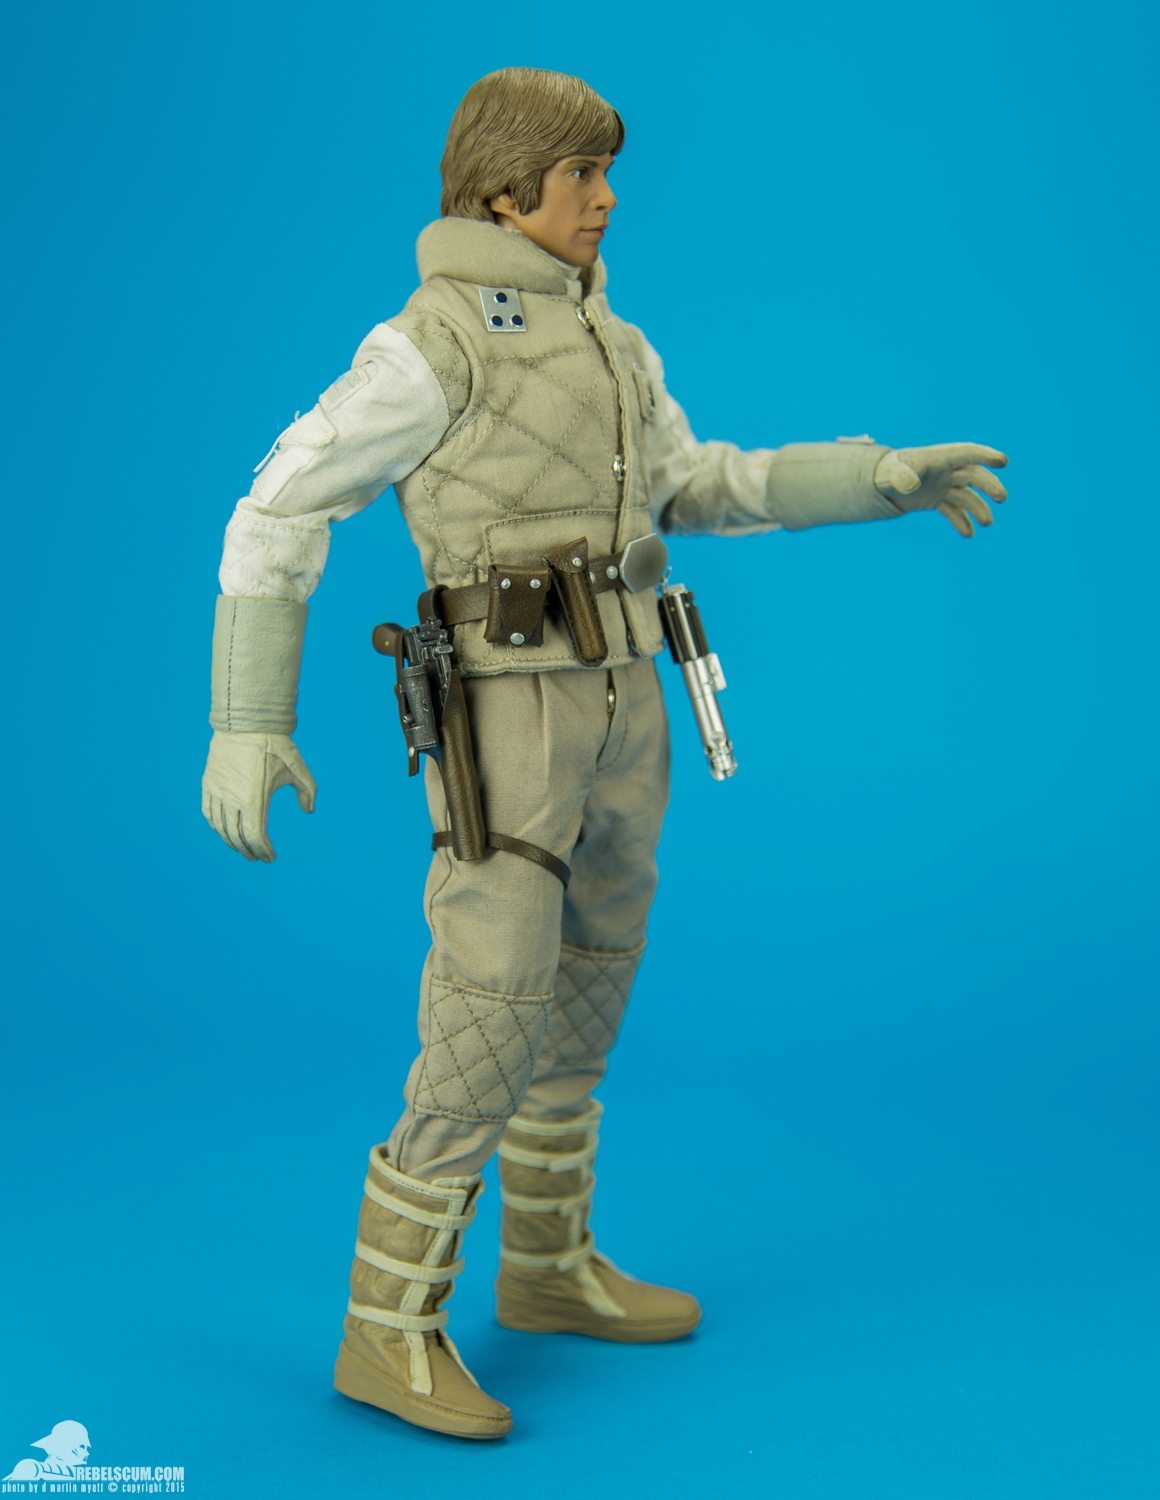 Luke-Skywalker-Hoth-Sixth-Scale-Sideshow-Collectibles-Star-Wars-002.jpg